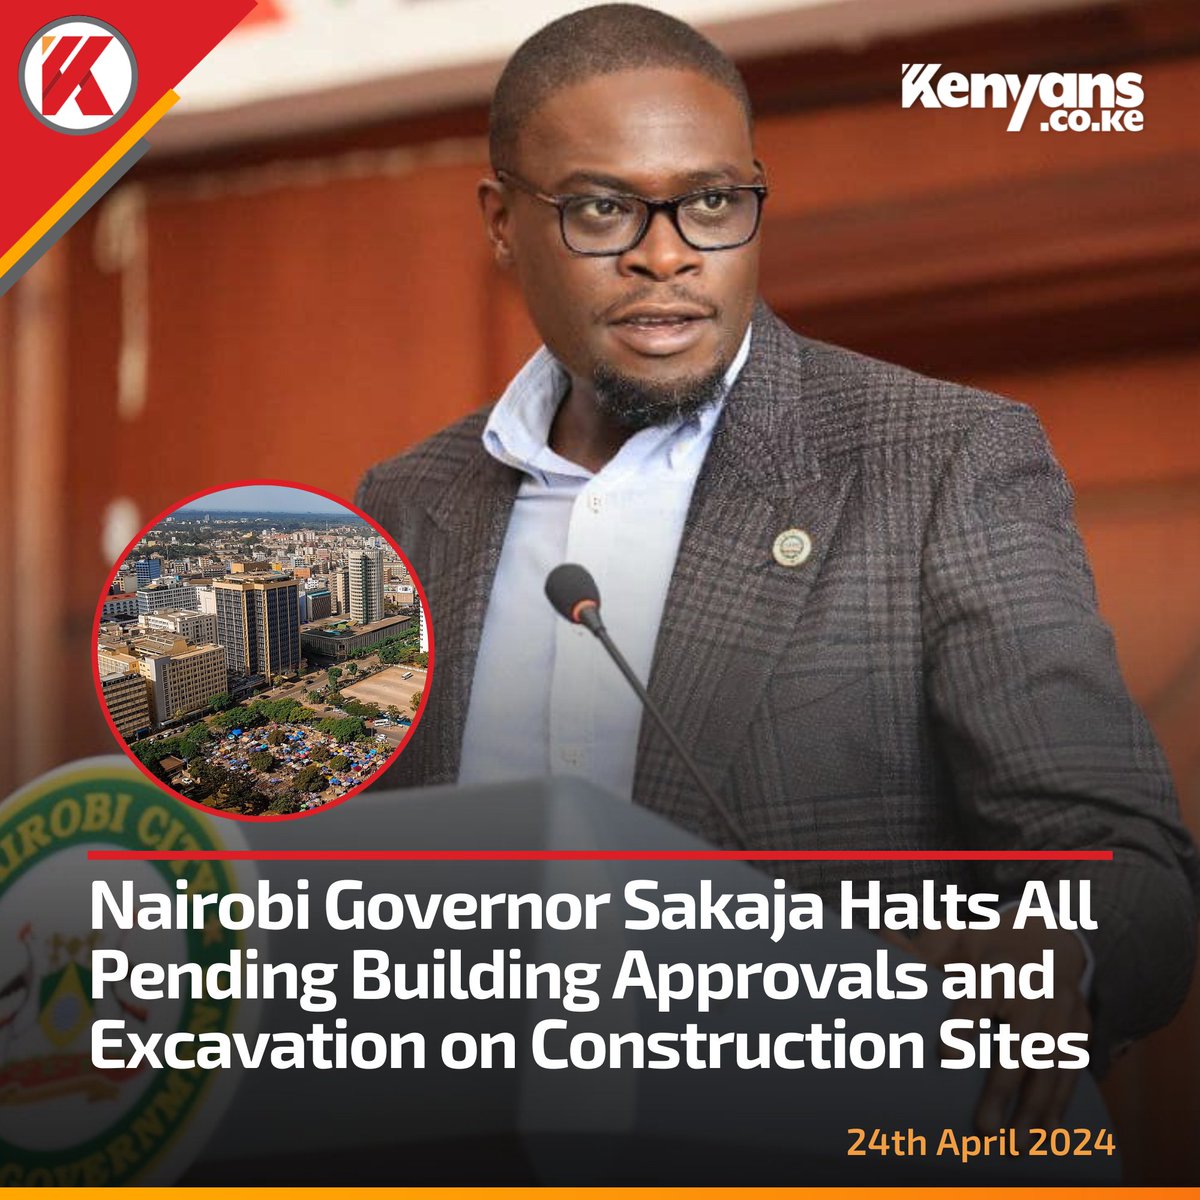 Jerotich Seii raised her voice. She warned of dire consequences. Nairobi mafia cartels fought back. Mr. Sakaja even announced that 25 storey houses shall be built. The gods and goddesses gathered. The rains are their signature upon what @JerotichSeii warned against for free. 🚶🏾‍♂️⚖️